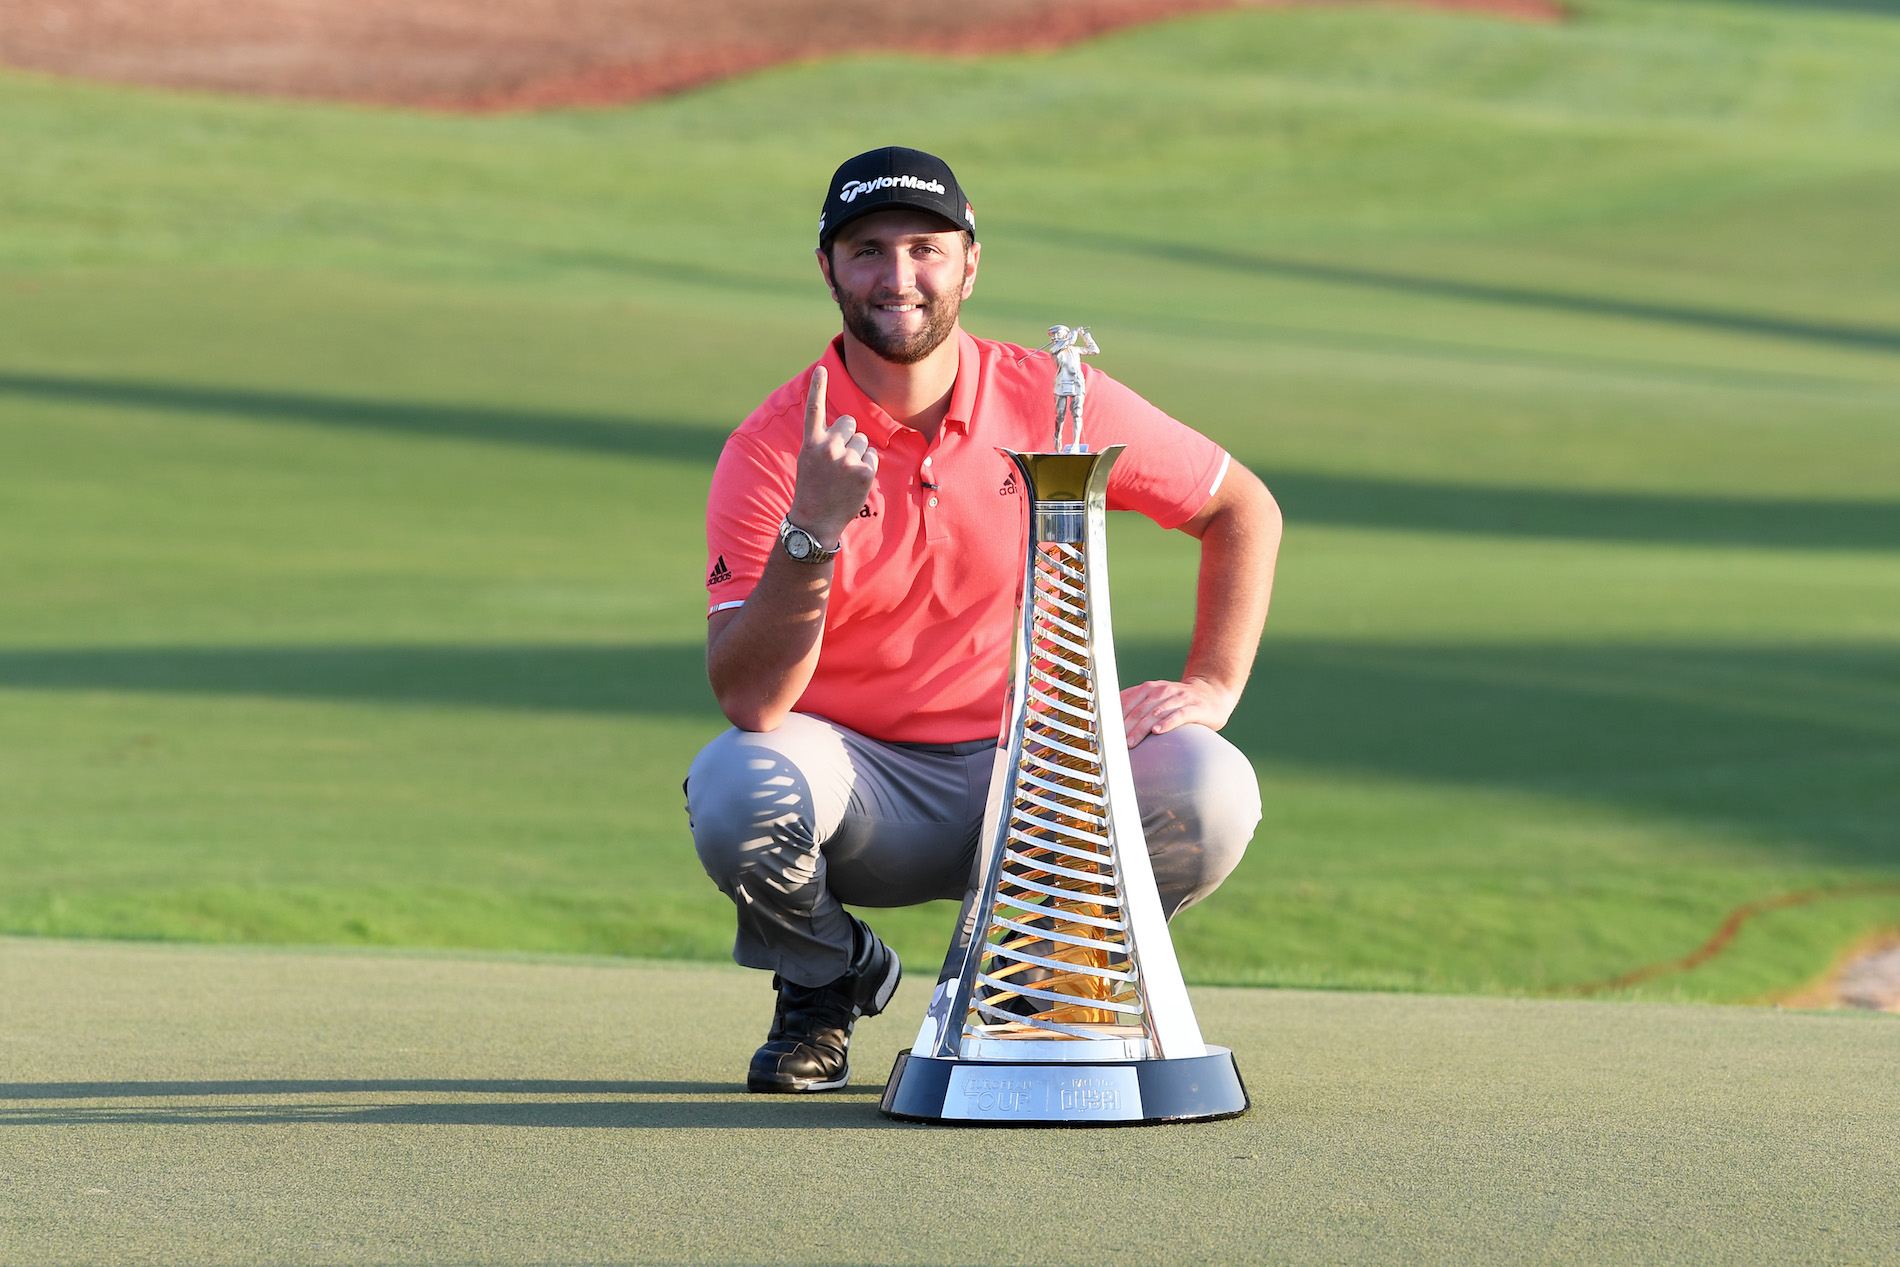 Jon Rahm has a commanding four-shot lead heading into the final round at The Memorial, and he can become No.1 in the world with a win.